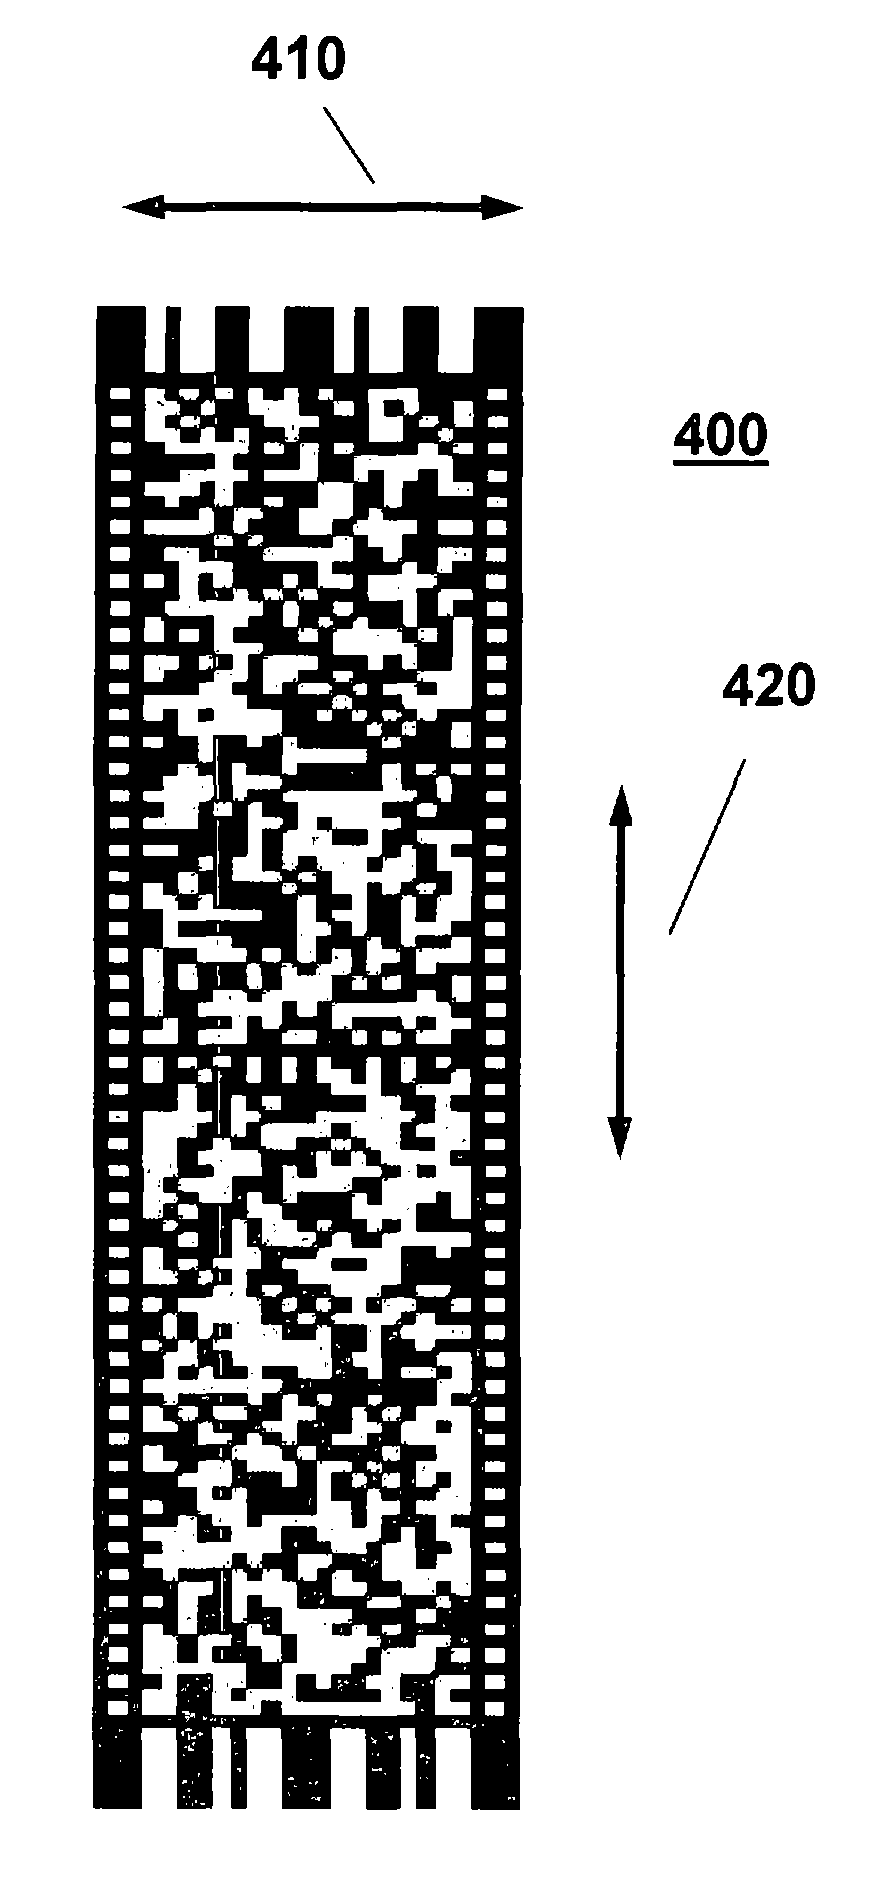 Methods and systems for encoding and decoding data in 2D symbology